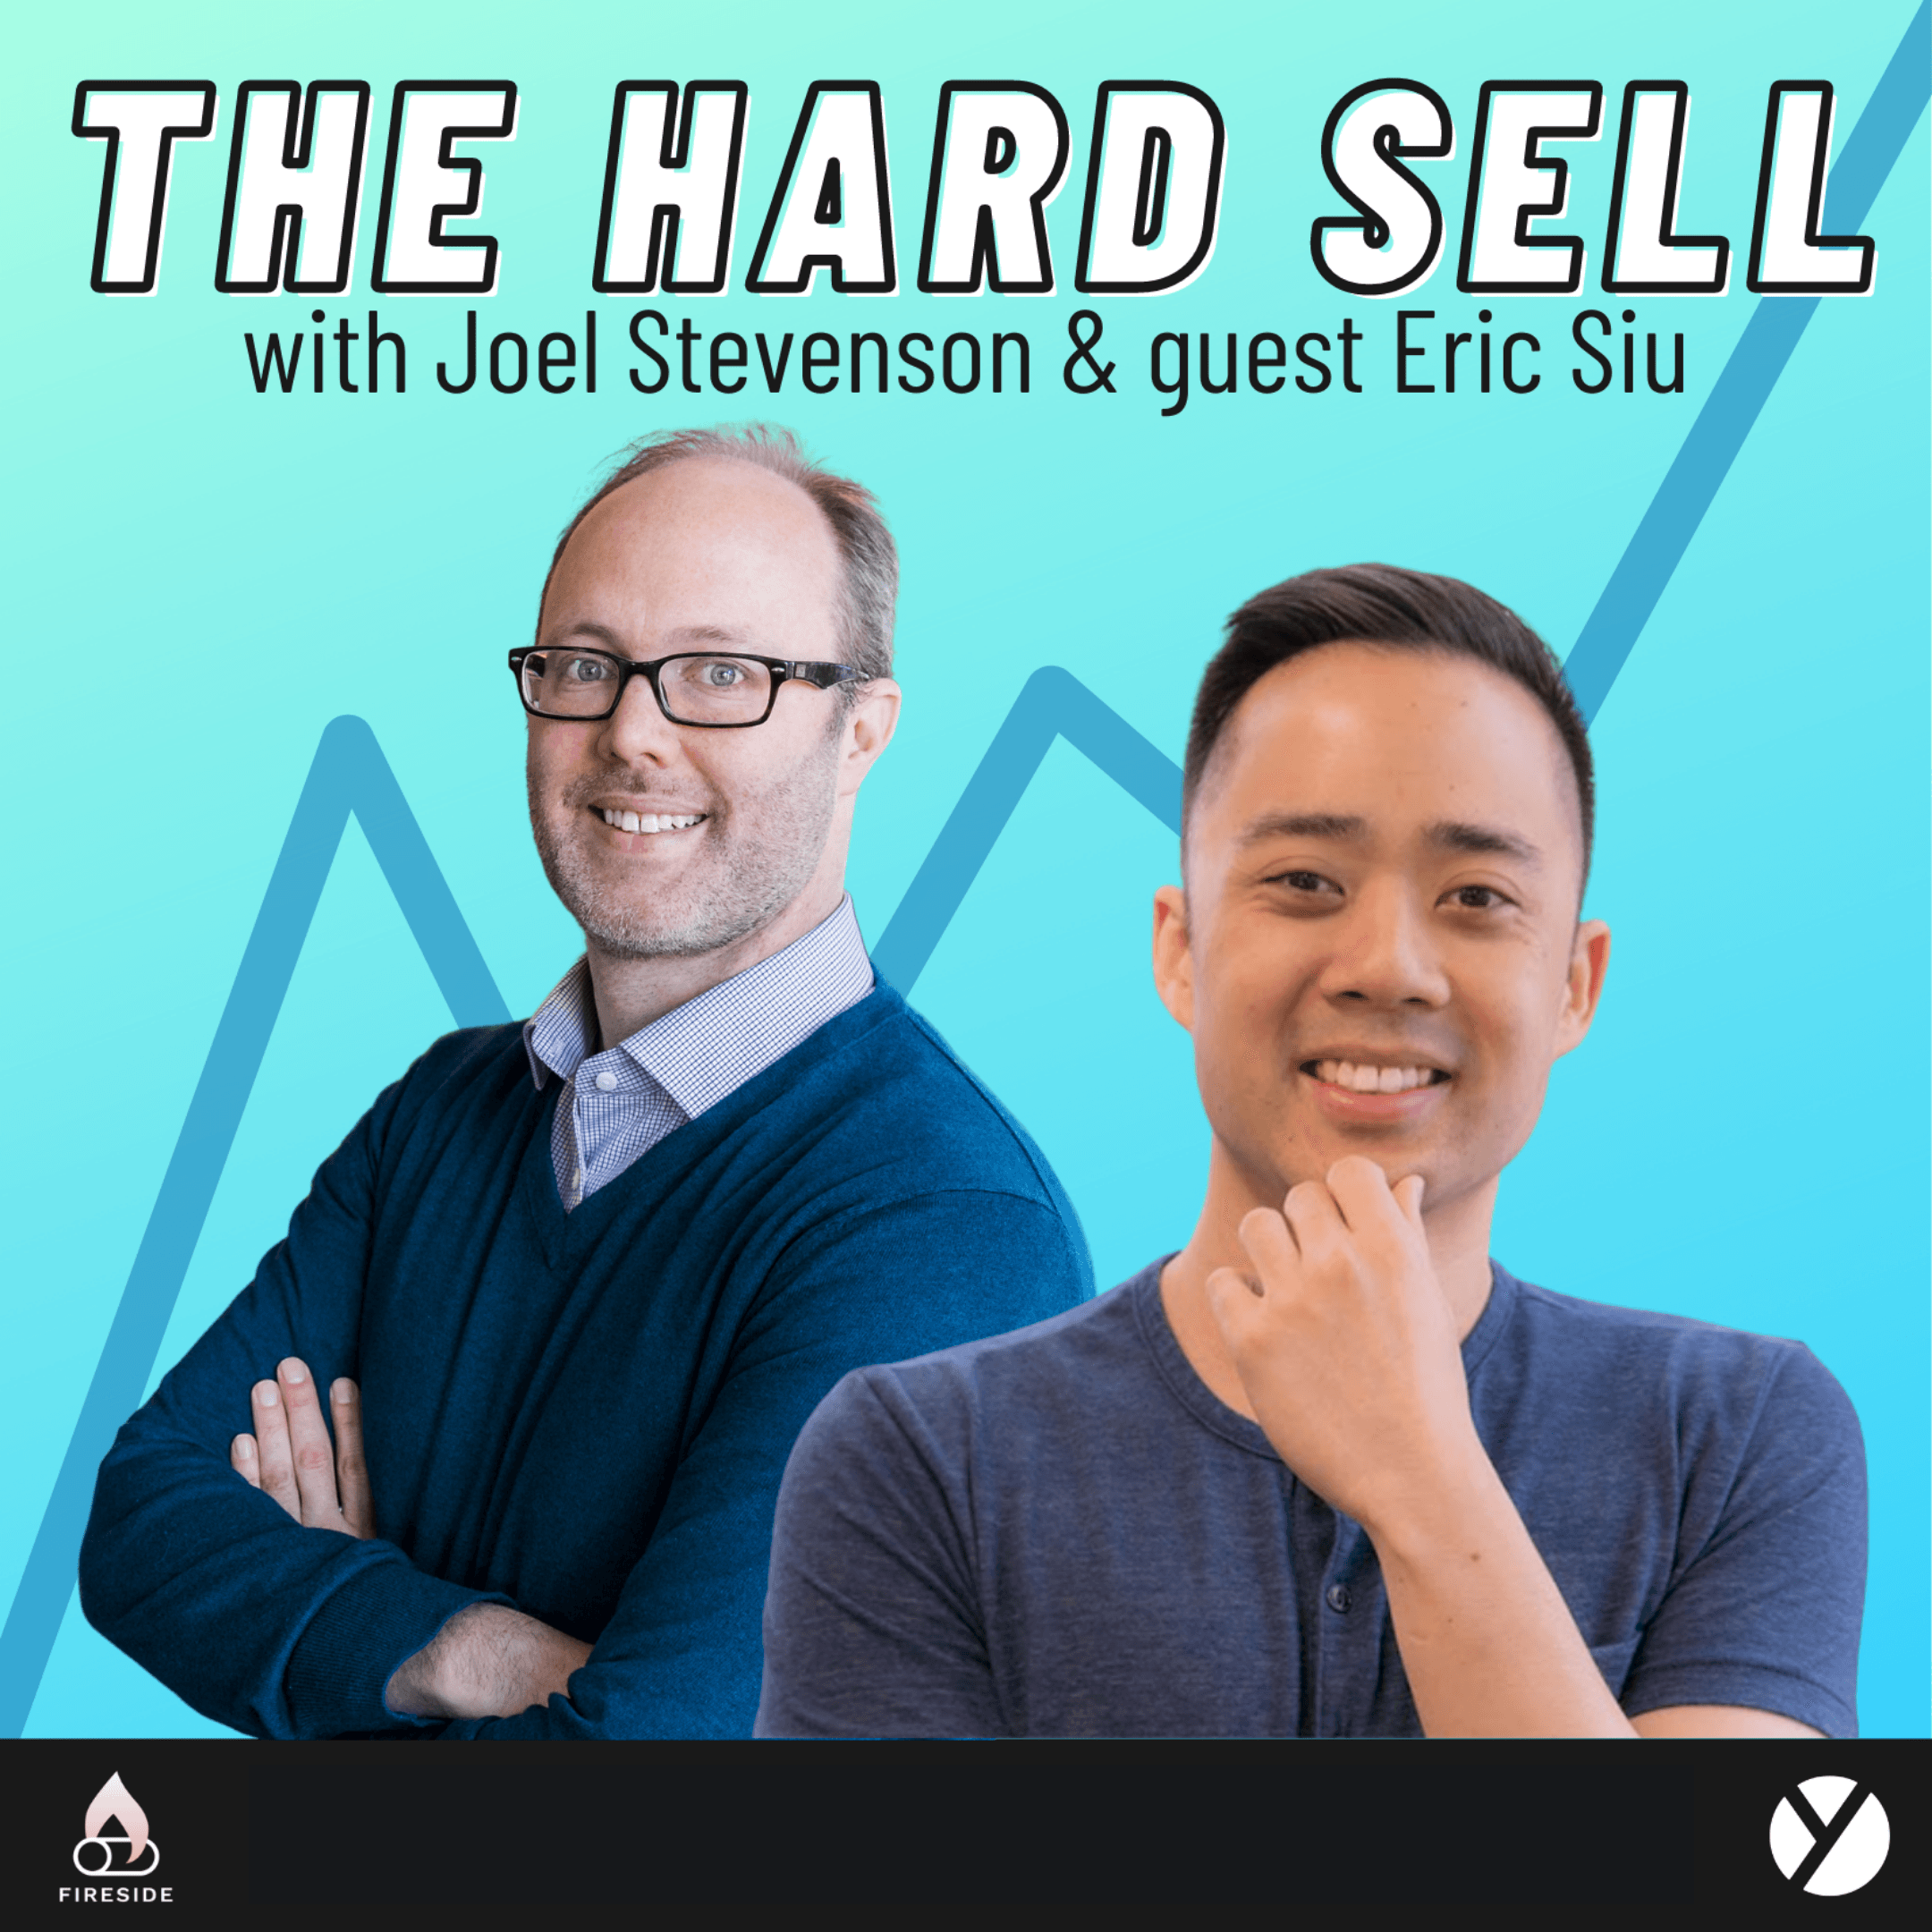 The Hard Sell with guest Eric Siu